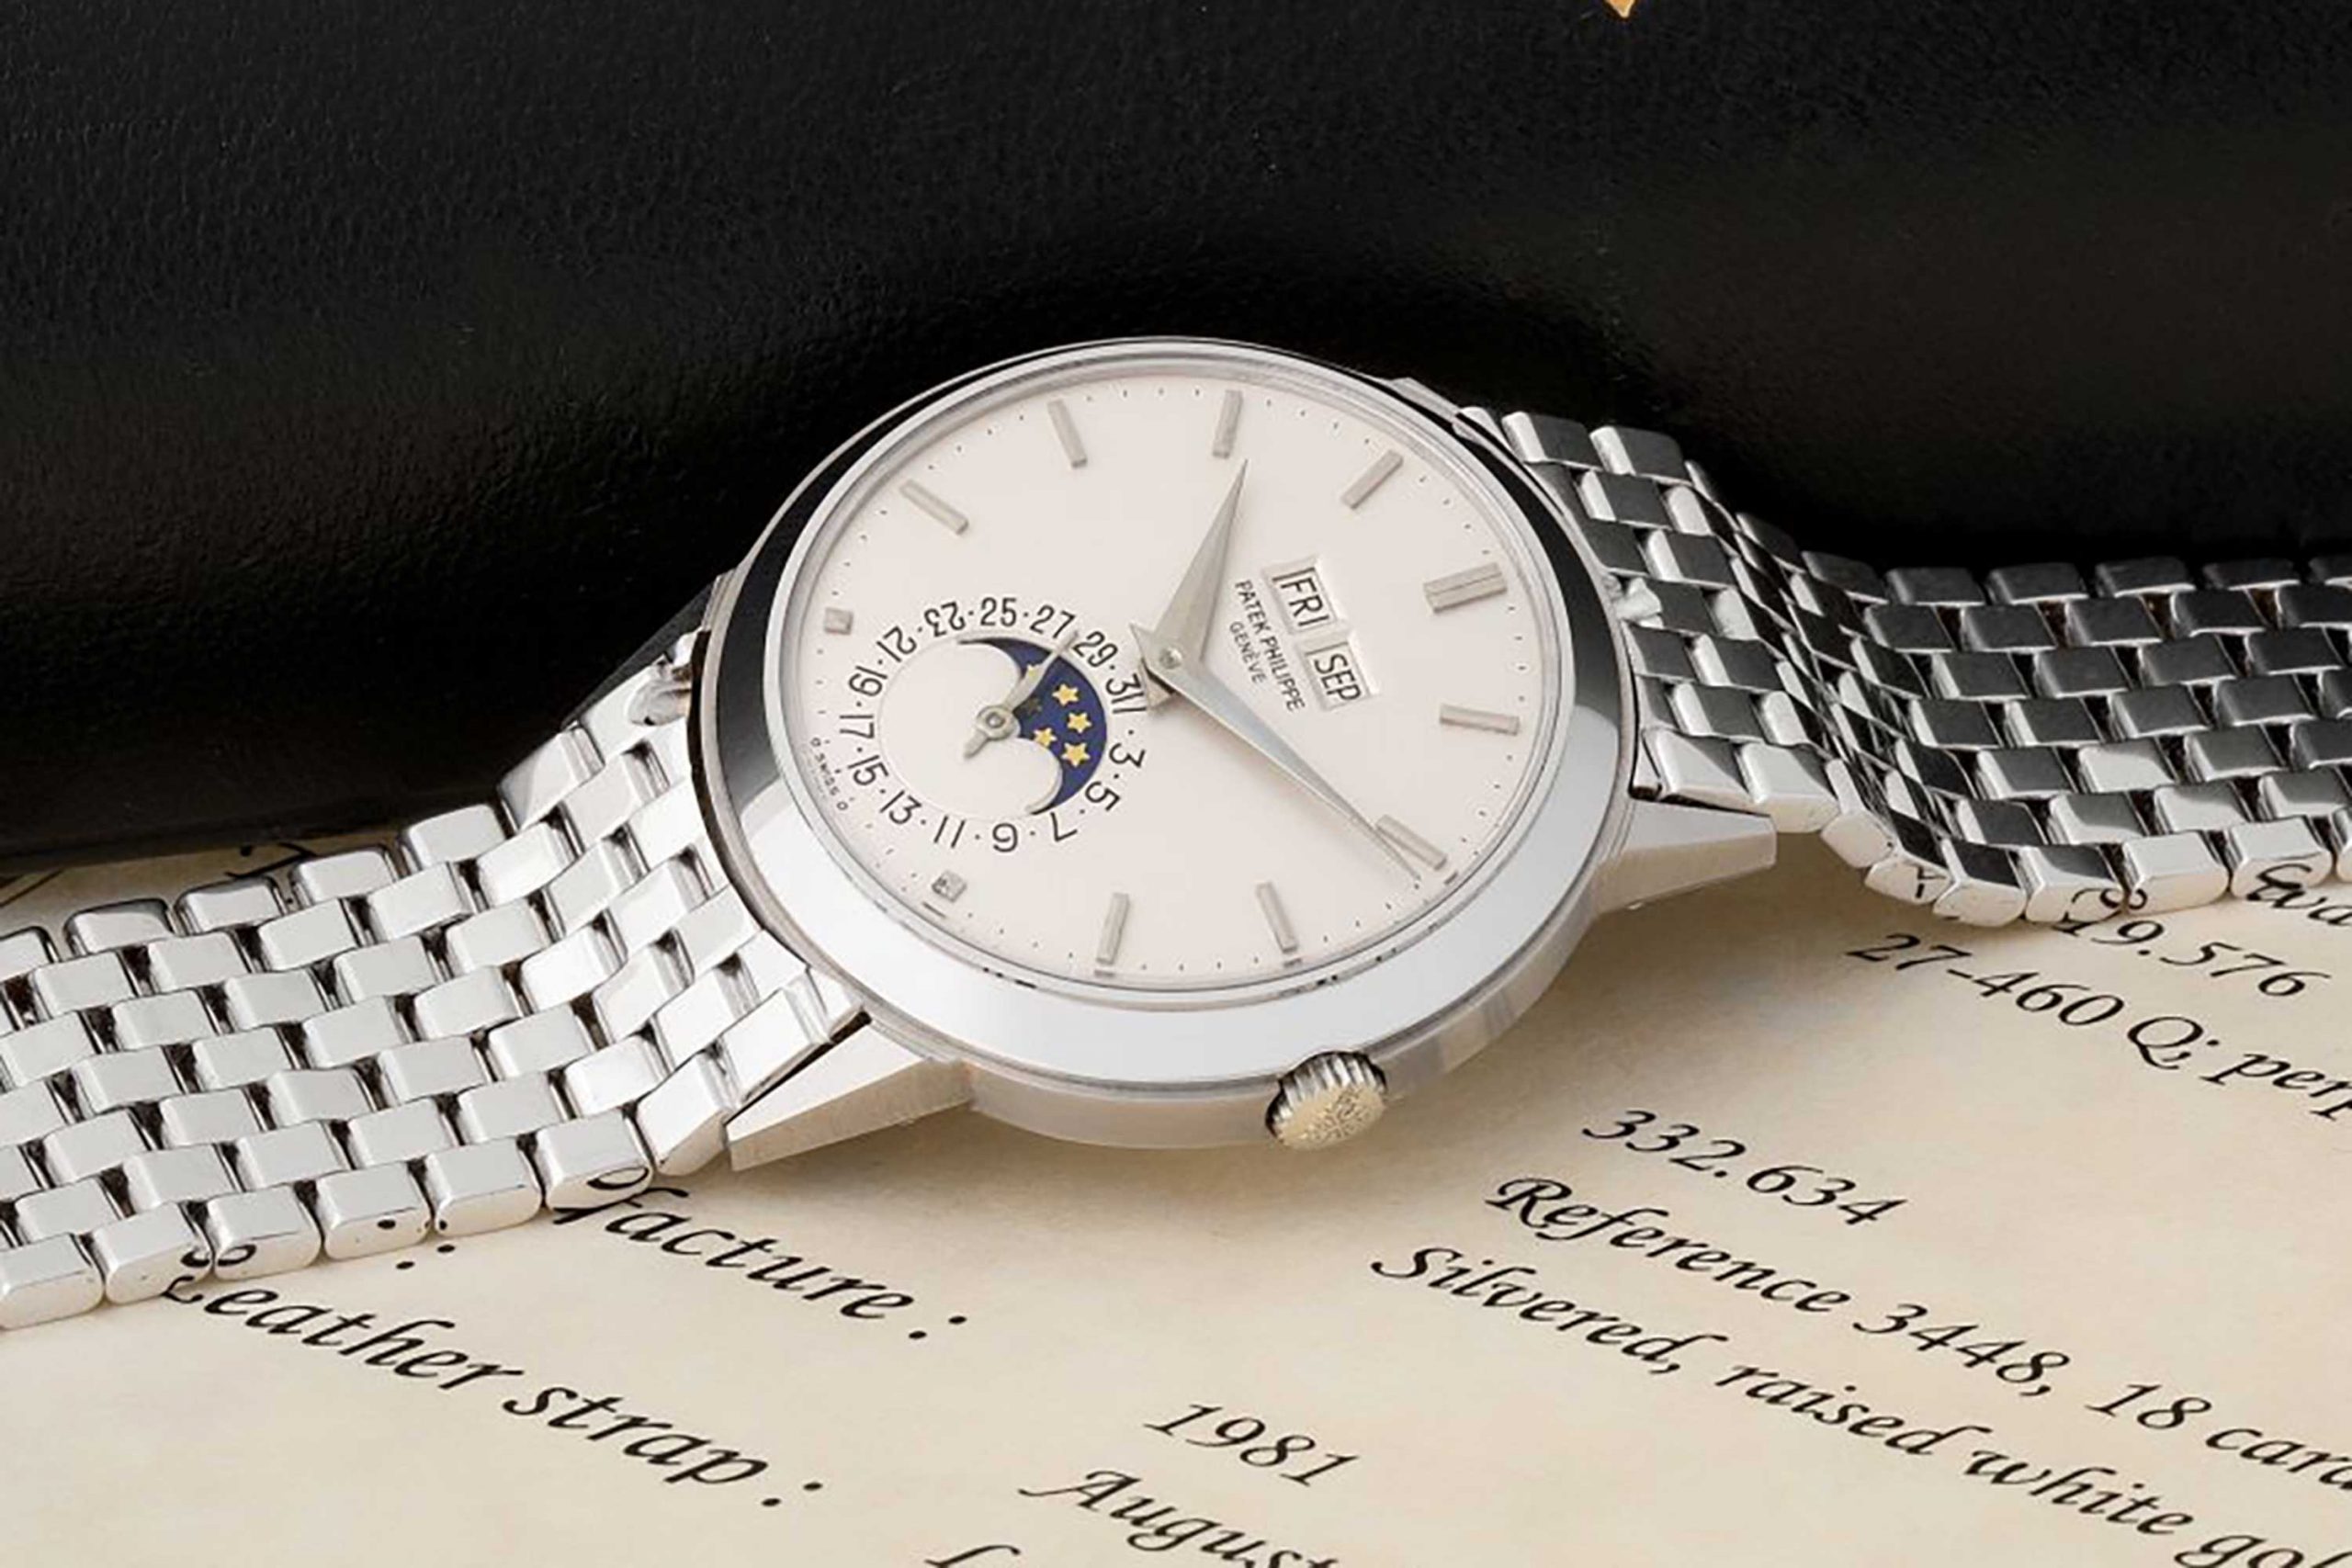 Lot 249: Patek Philippe Extremely Rare and Very Well Preserved, “padellone” Perpetual Calendar, Automatic Wristwatch in White-gold, Reference 3448 (Image: Monaco Legend Groups)